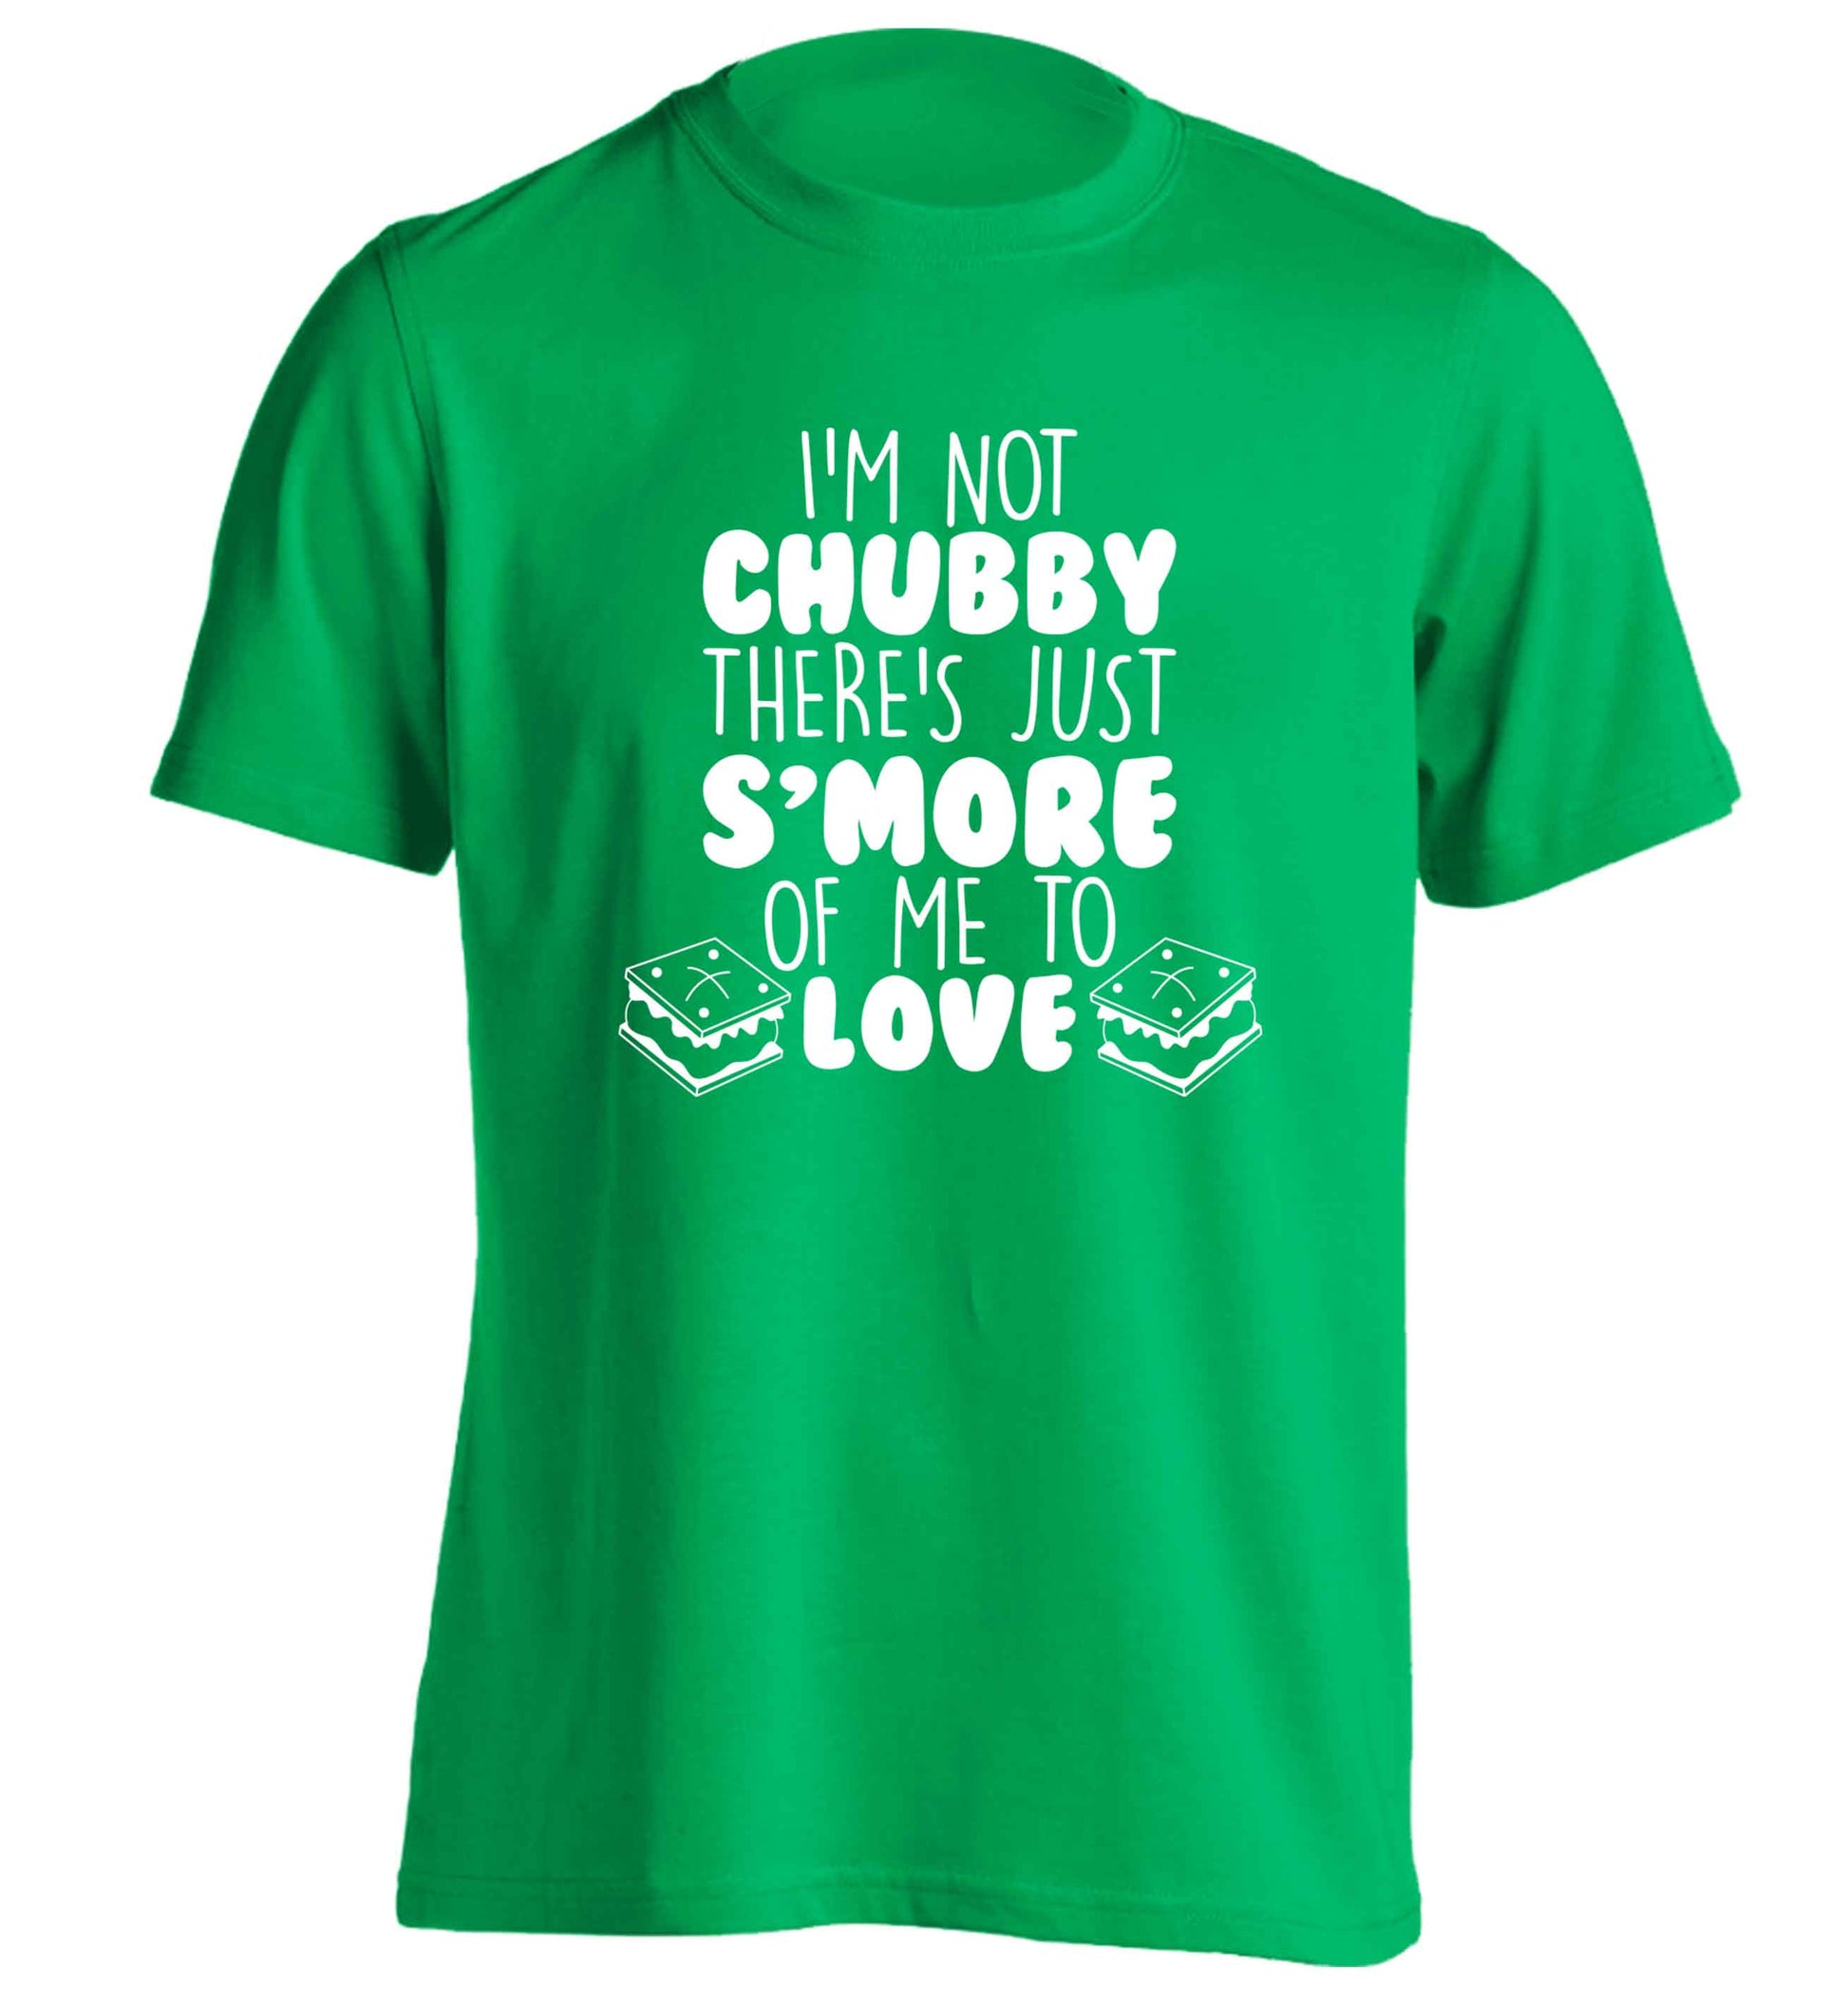 I'm not chubby there's just s'more of me to love adults unisex green Tshirt 2XL